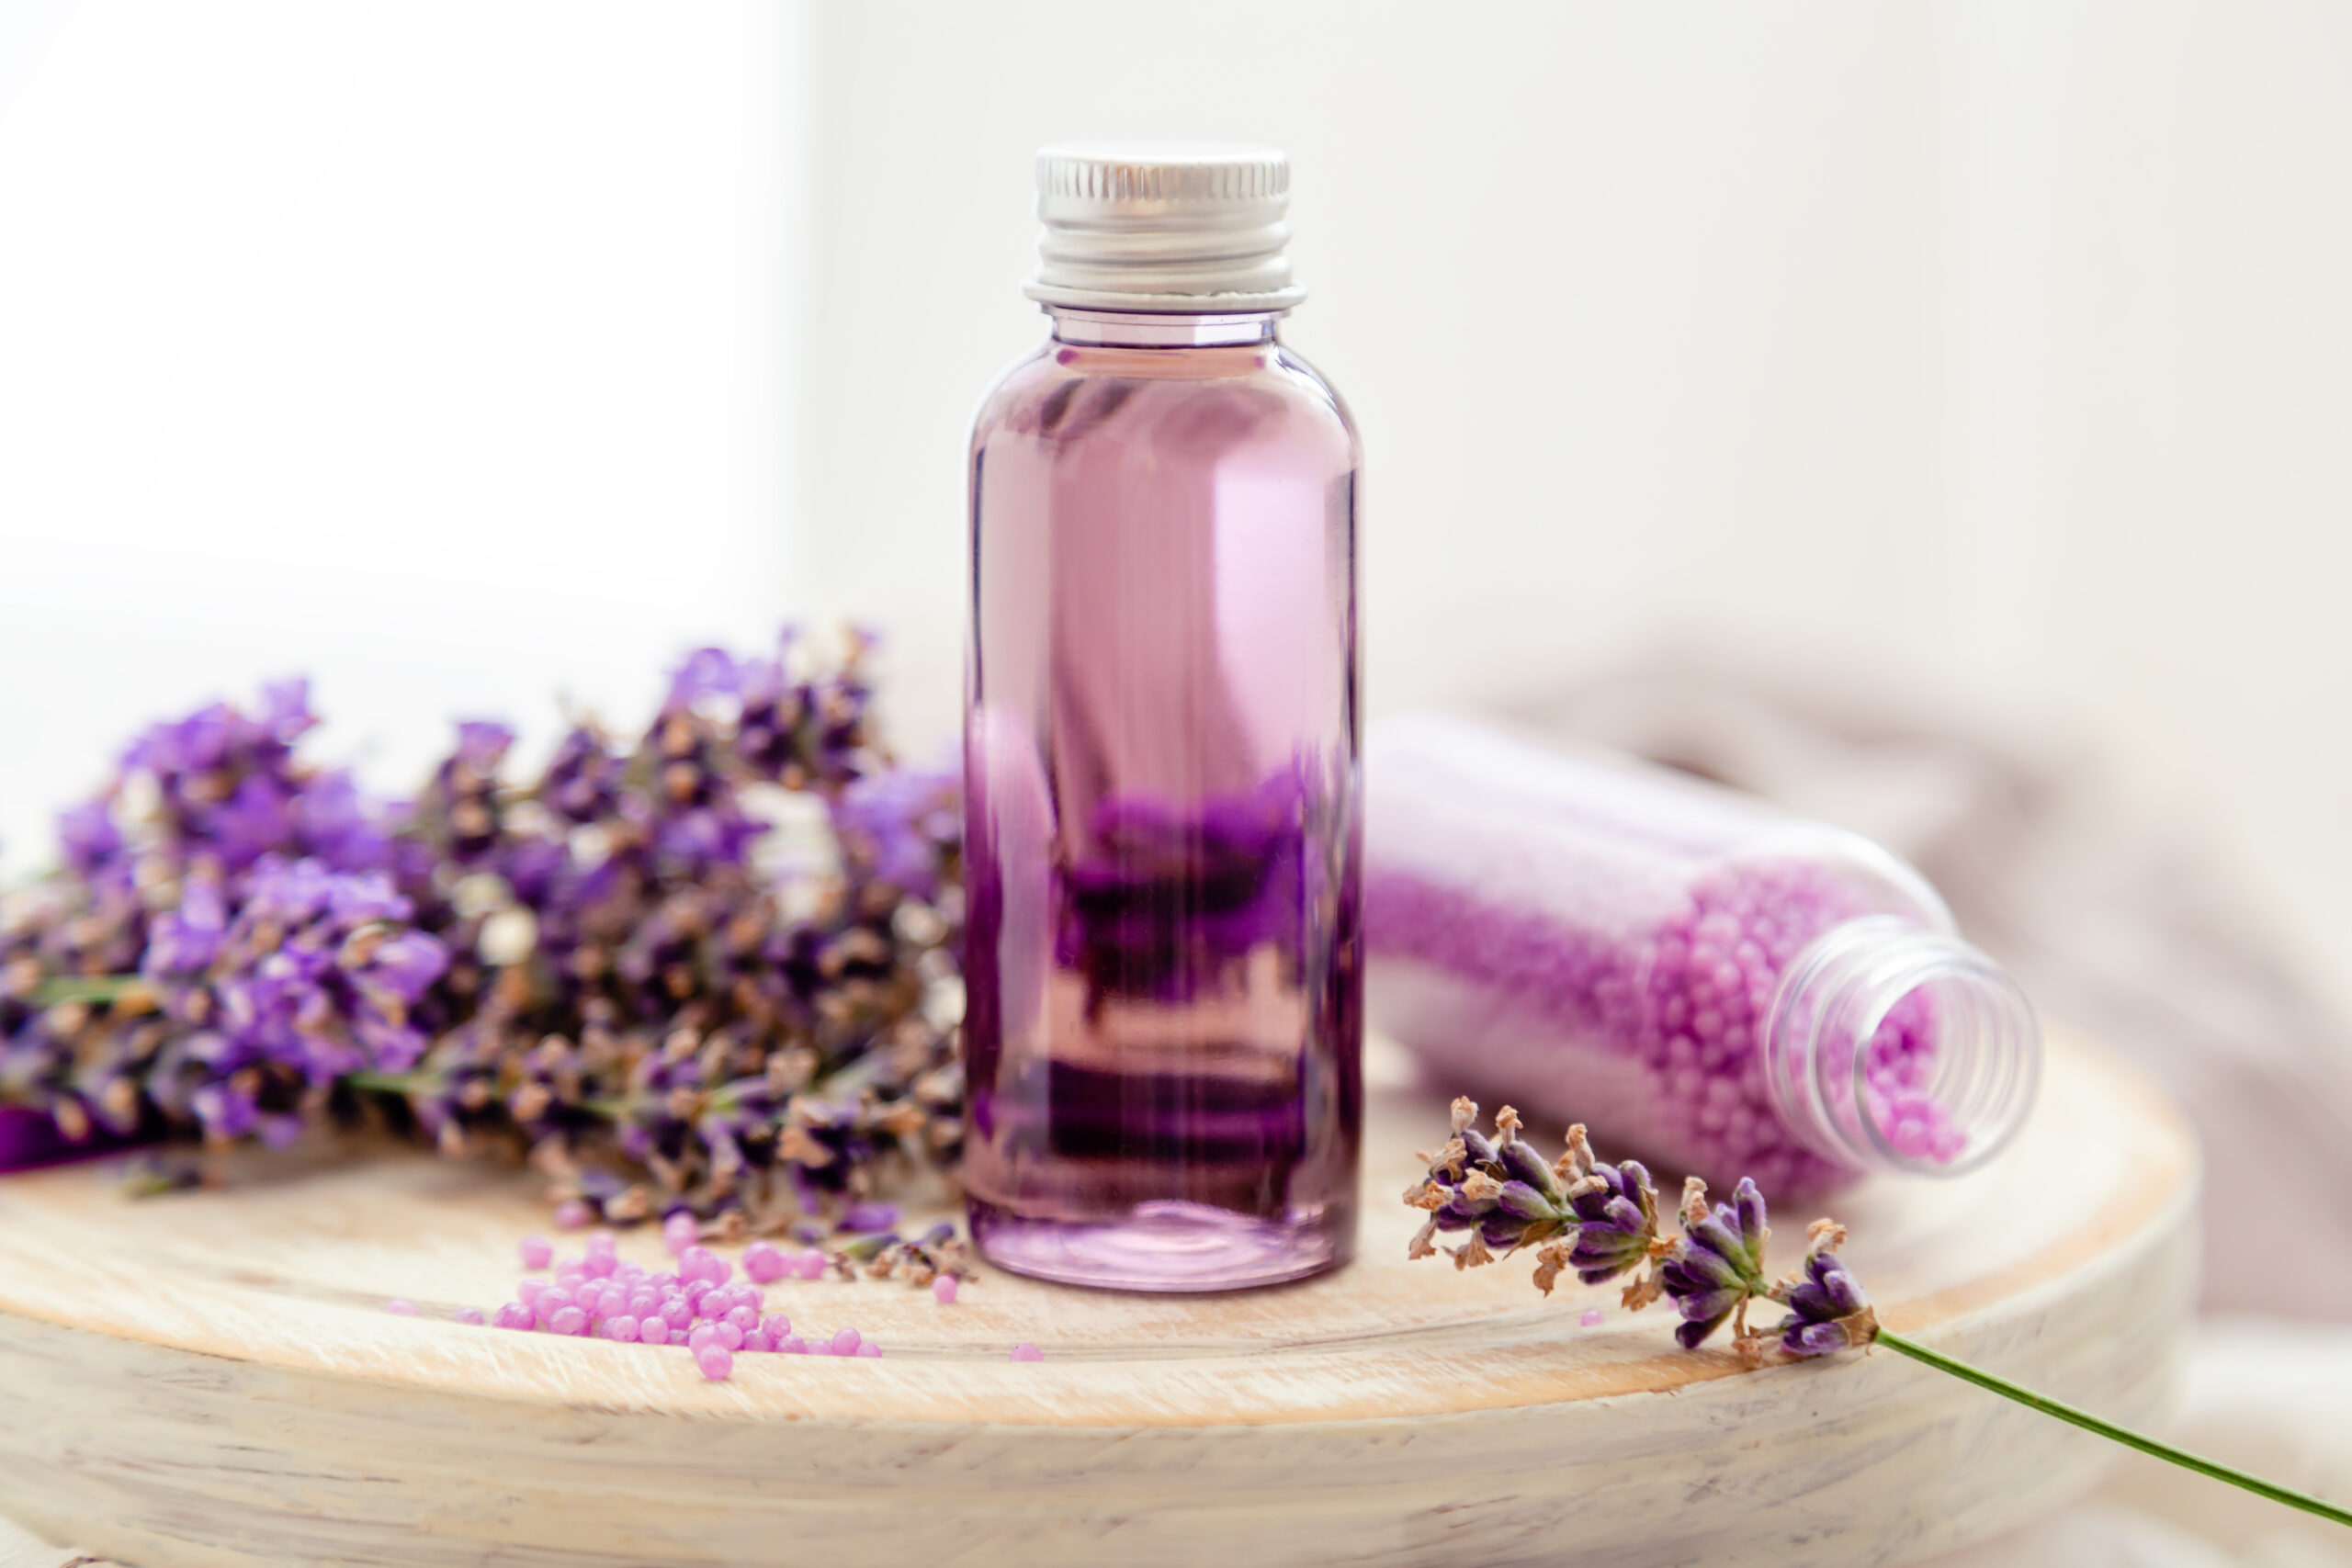 Association of Producers of the PDO Lavender Essential Oil of Haute-Provence (APAL)